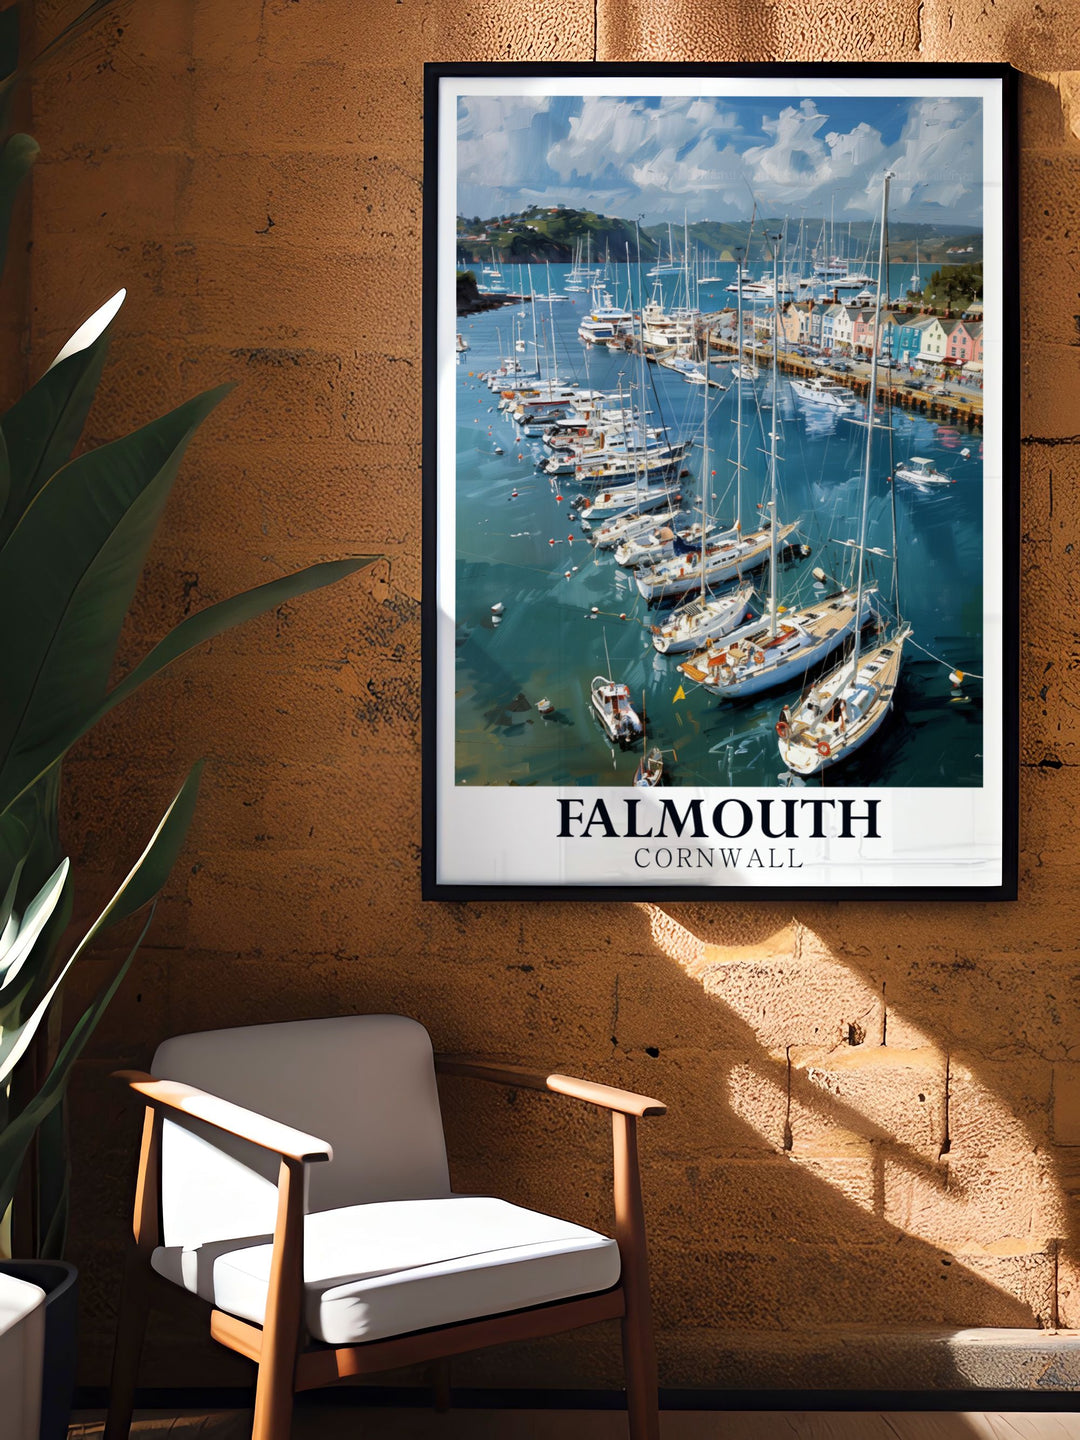 Stunning Falmouth Harbour artwork that evokes the charm of Cornwalls coastal town. Perfect for gifting to Falmouth lovers or adding to your own decor, this print brings a piece of the serene harbour into your home.